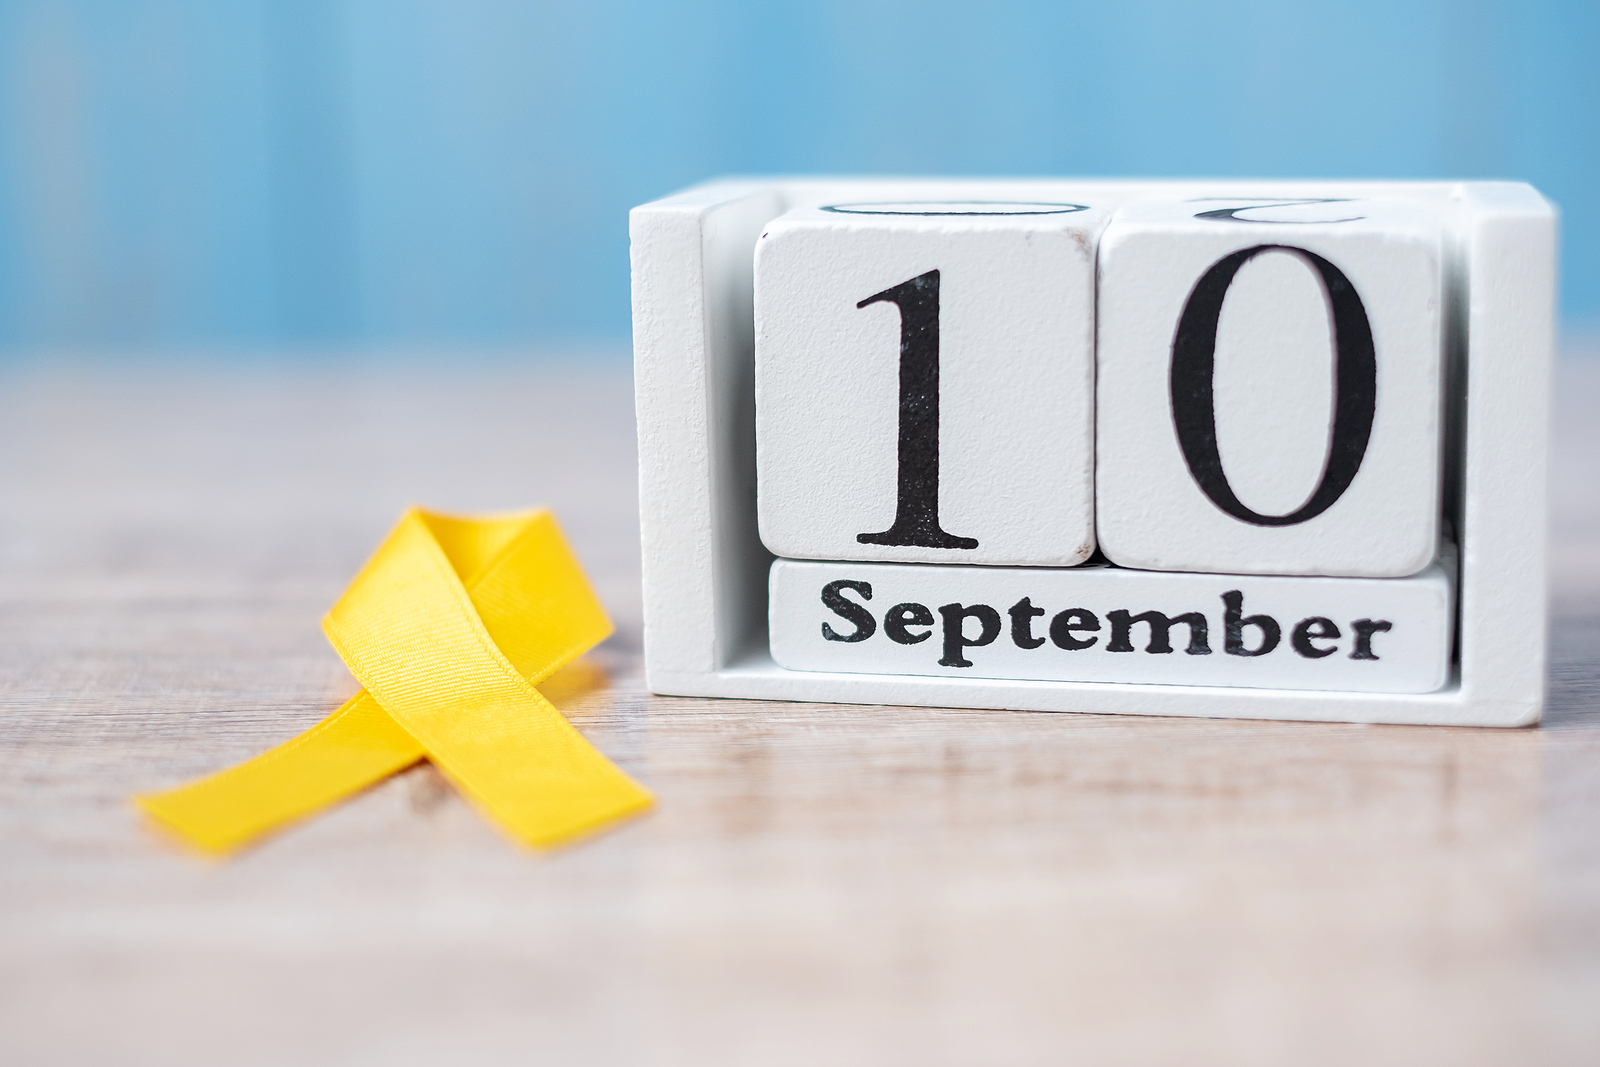 World Suicide Day on 10 Sept 2019 is approaching